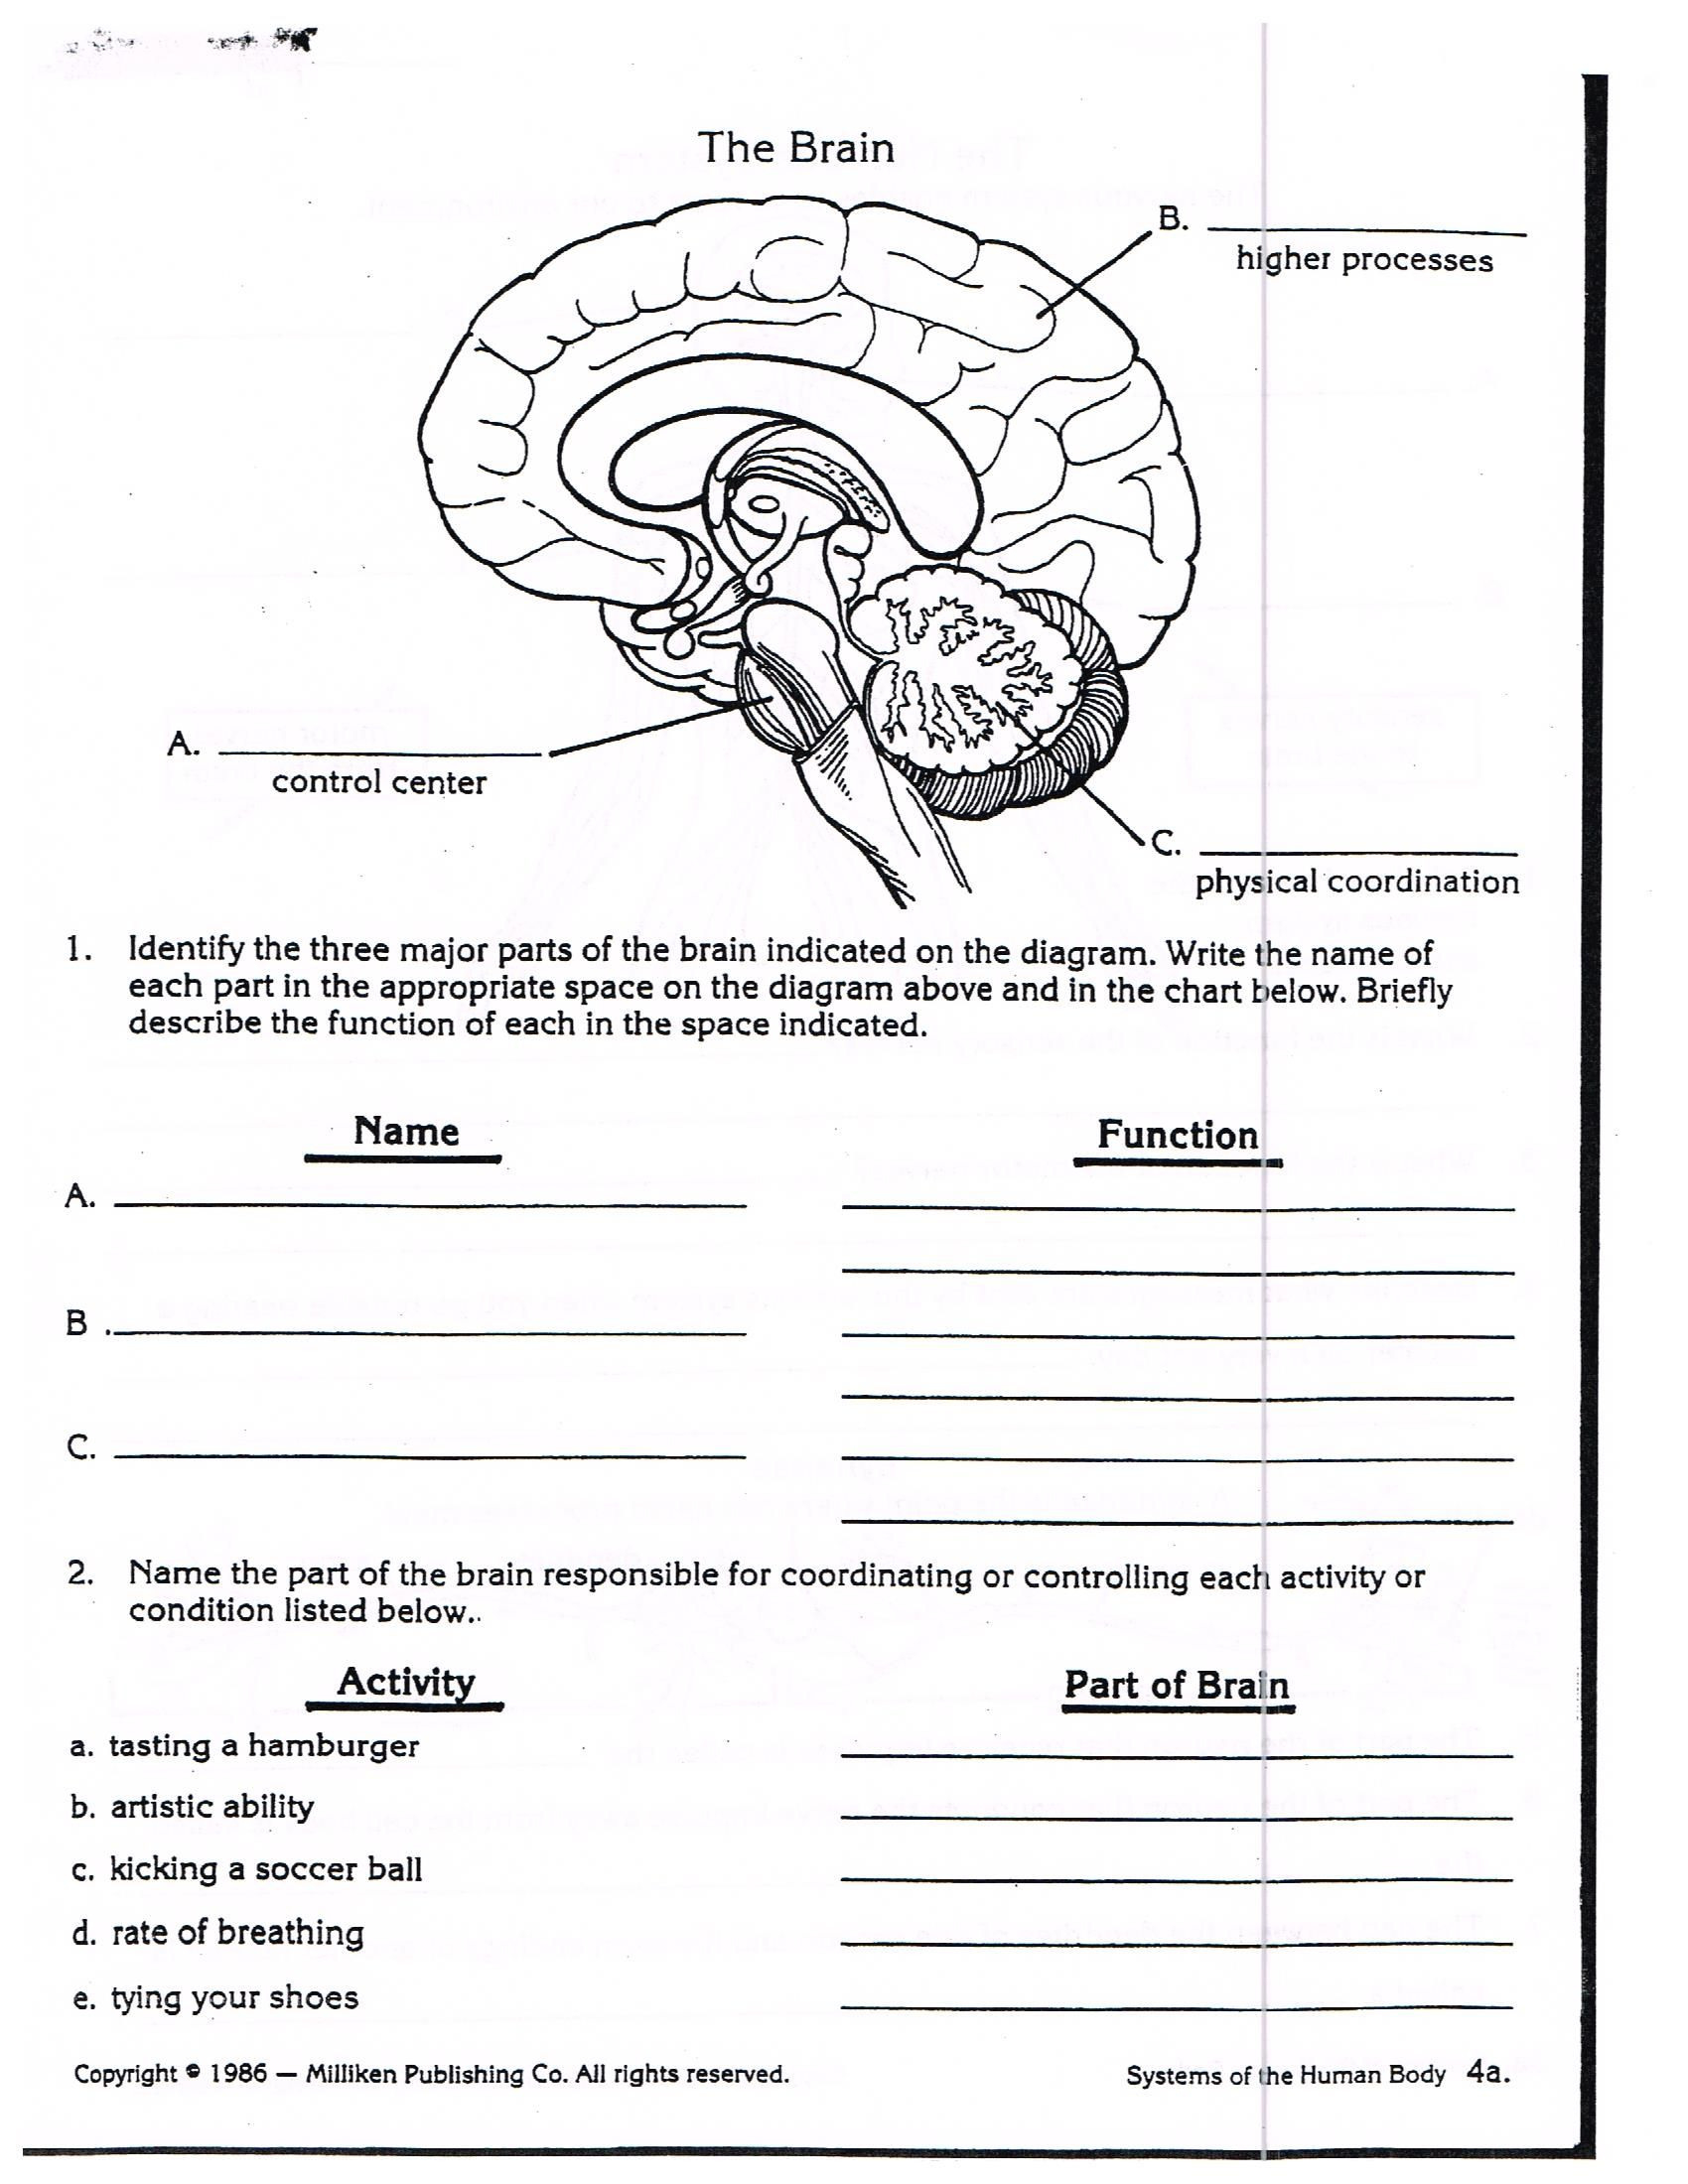 Sheep Brain Dissection Analysis Worksheet Answers